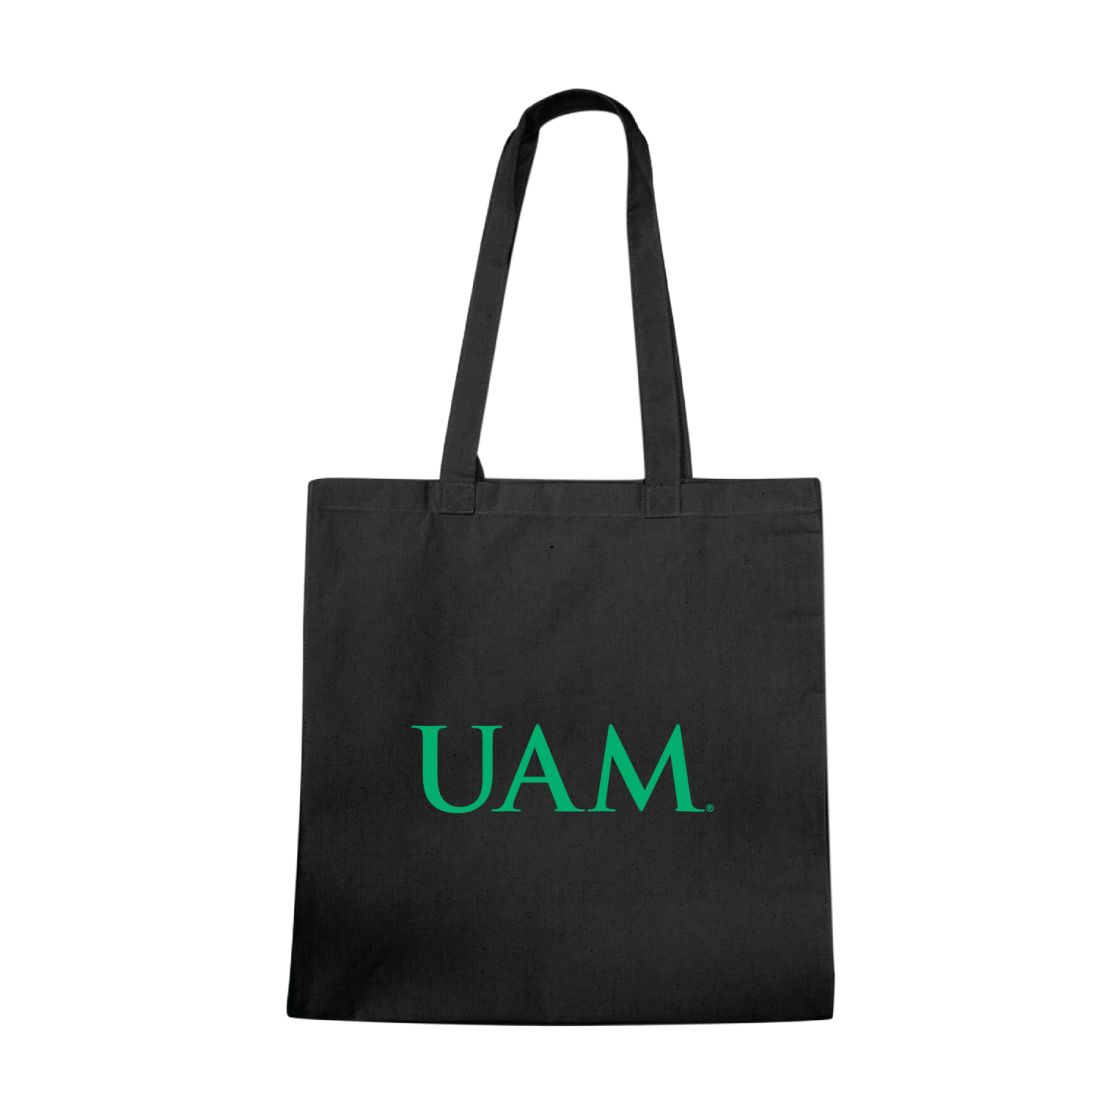 University of Arkansas at Monticello Boll Weevils & Cotton Blossoms Institutional Tote Bag